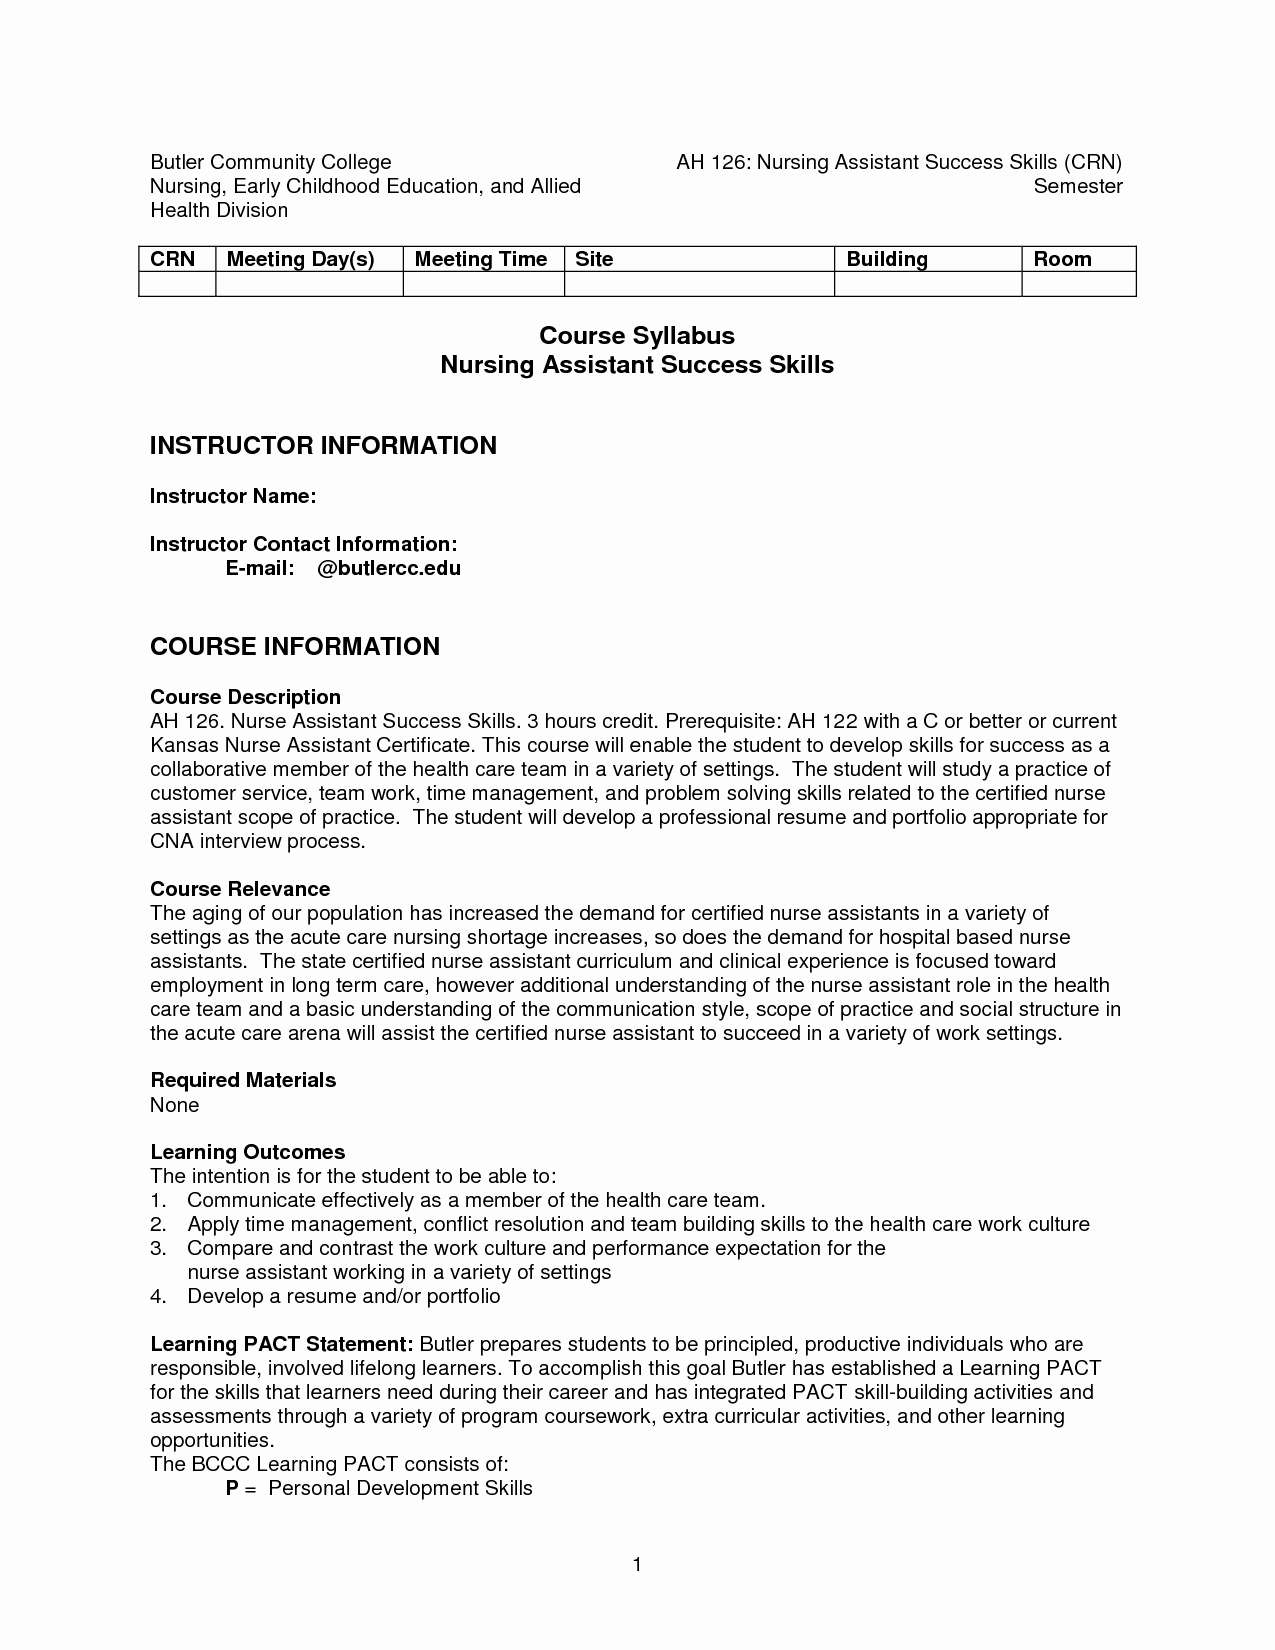 What are some Good Skills to Put A Job Resume